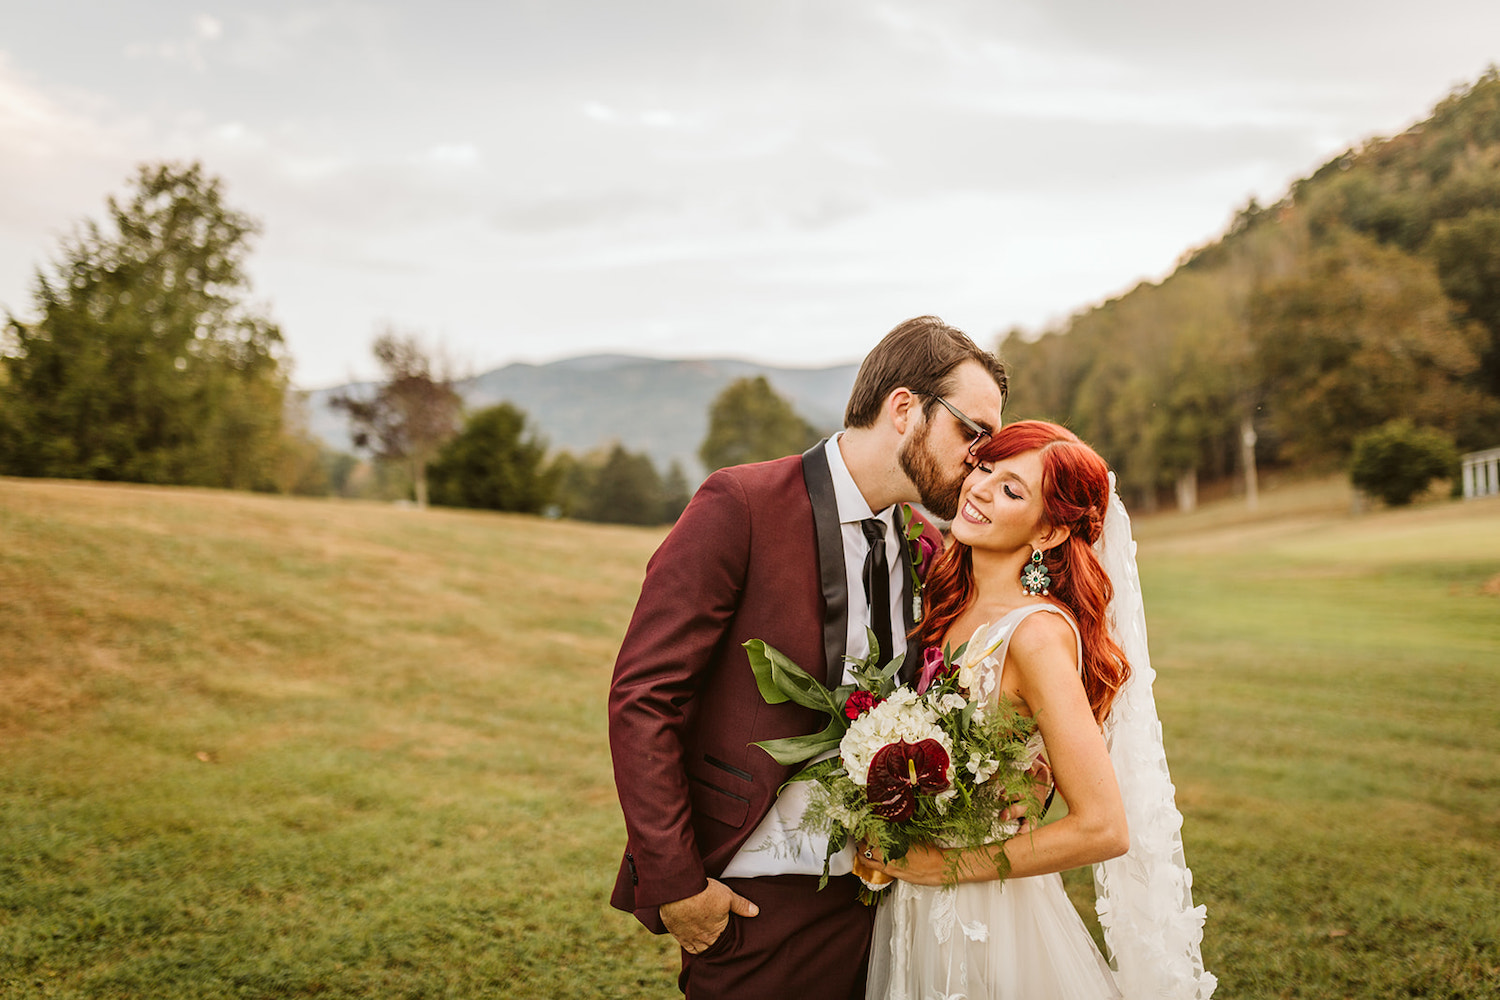 groom in maroon suit kisses brides cheek in grassy field with hills in the background at their Roan Mountain wedding